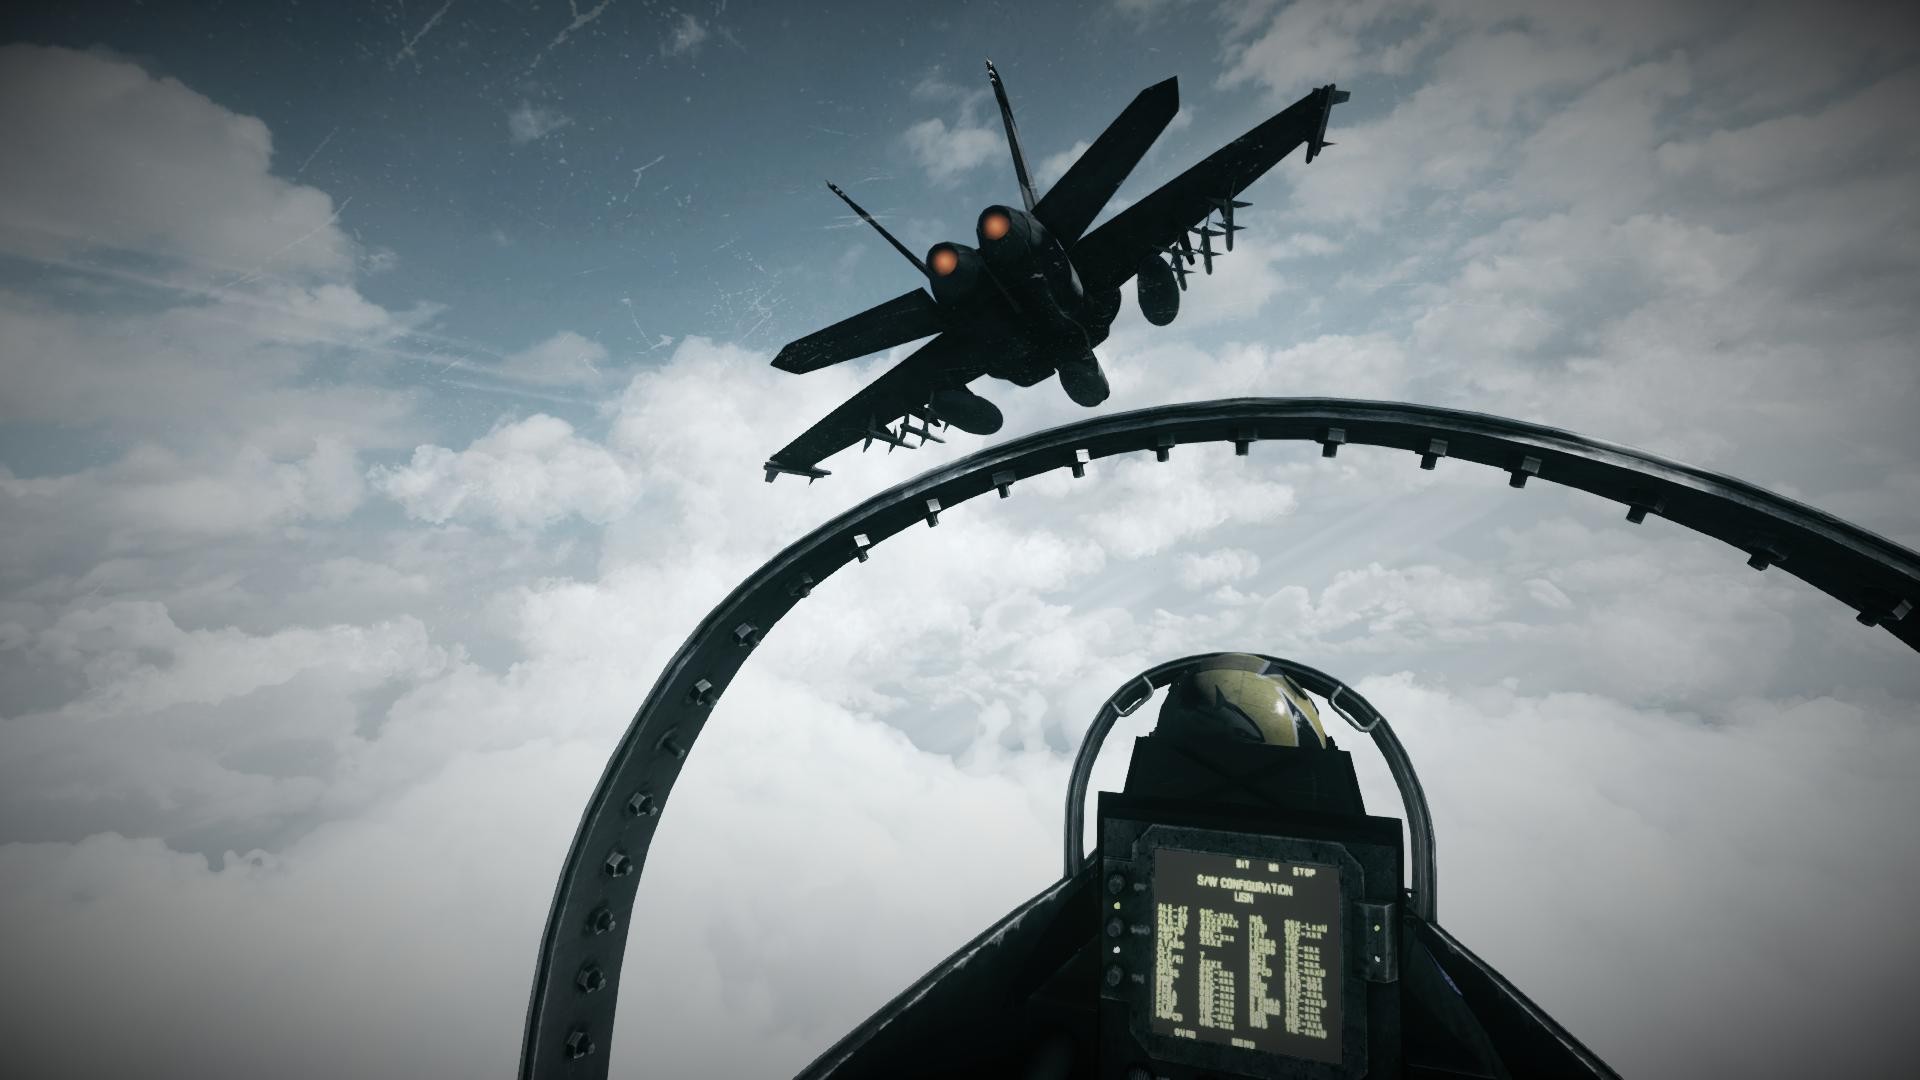 General 1920x1080 Battlefield 3 video games screen shot PC gaming military aircraft vehicle